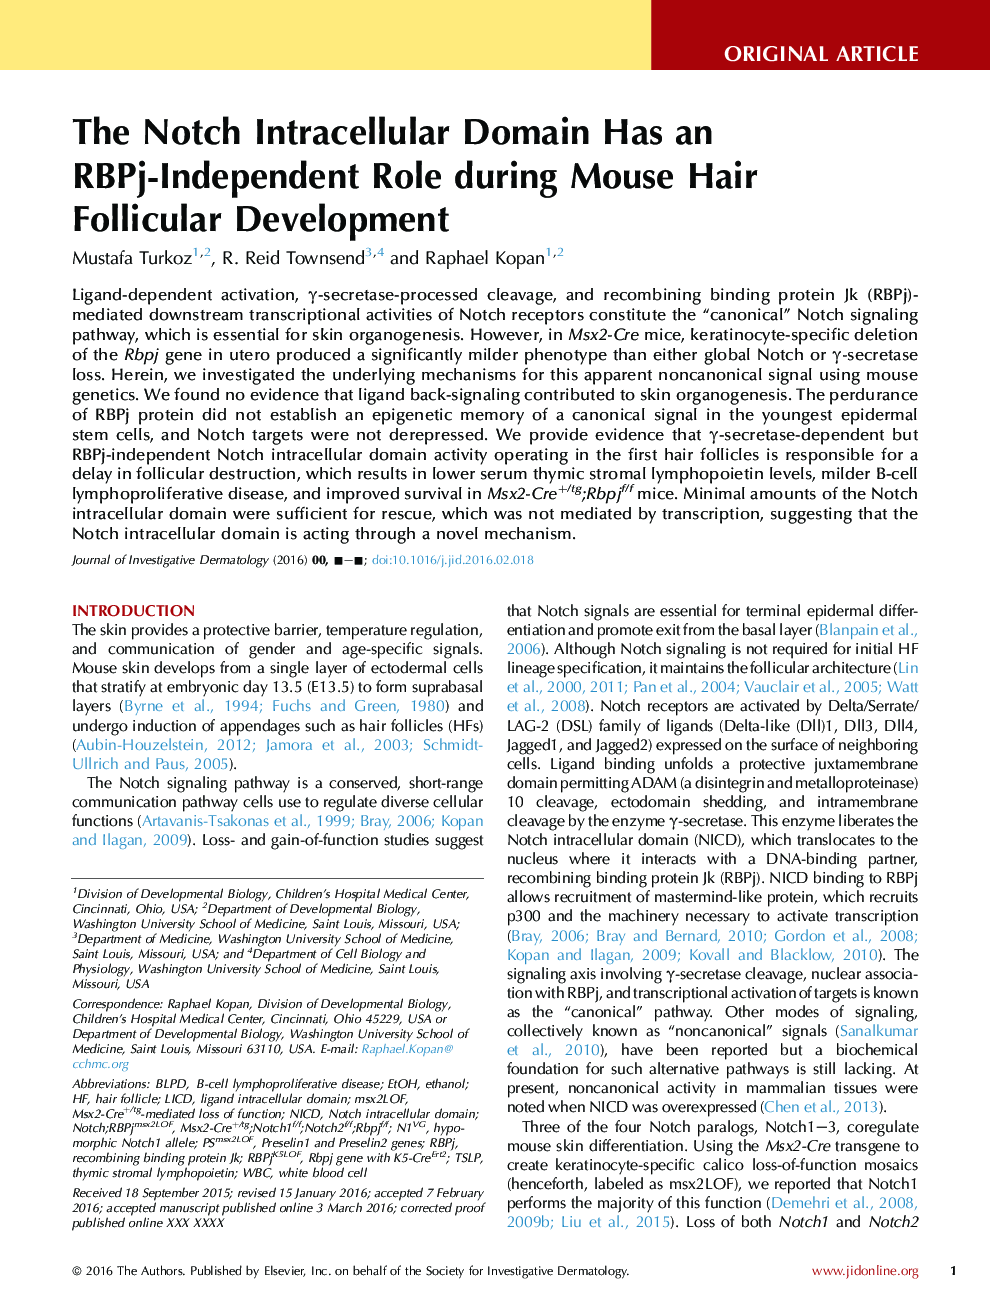 The Notch Intracellular Domain Has an RBPj-Independent Role during Mouse Hair Follicular Development